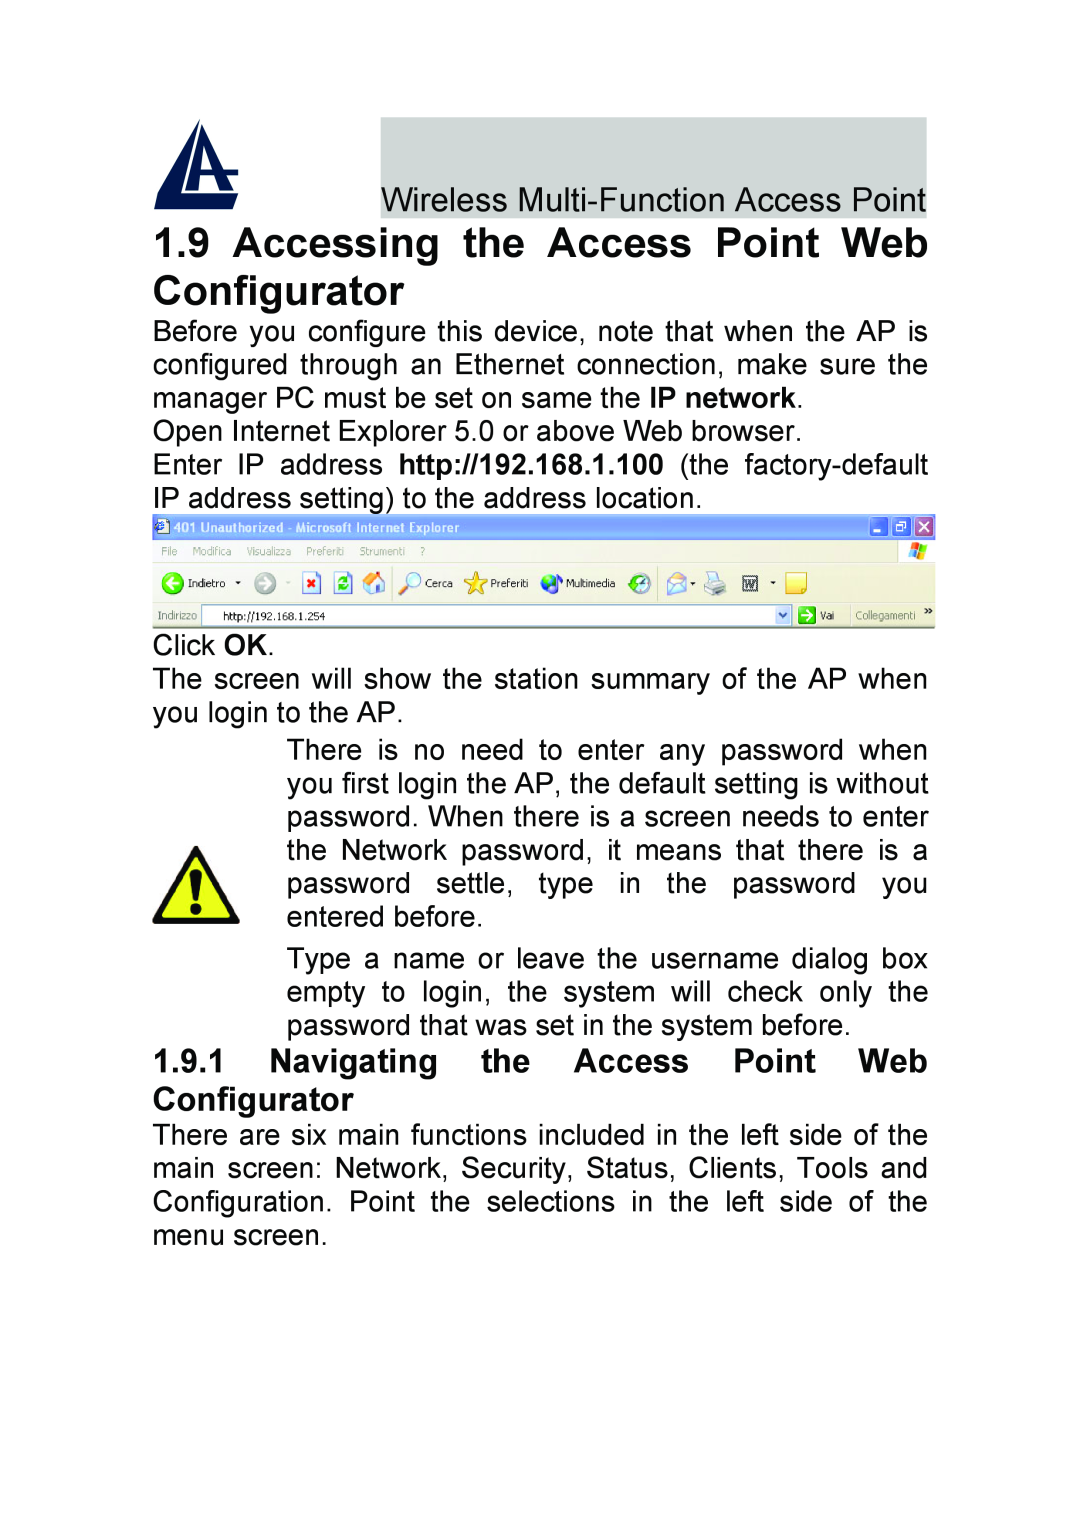 Atlantis Land A02-AP-W54_GE01 Accessing the Access Point Web Configurator, Navigating the Access Point Web Configurator 